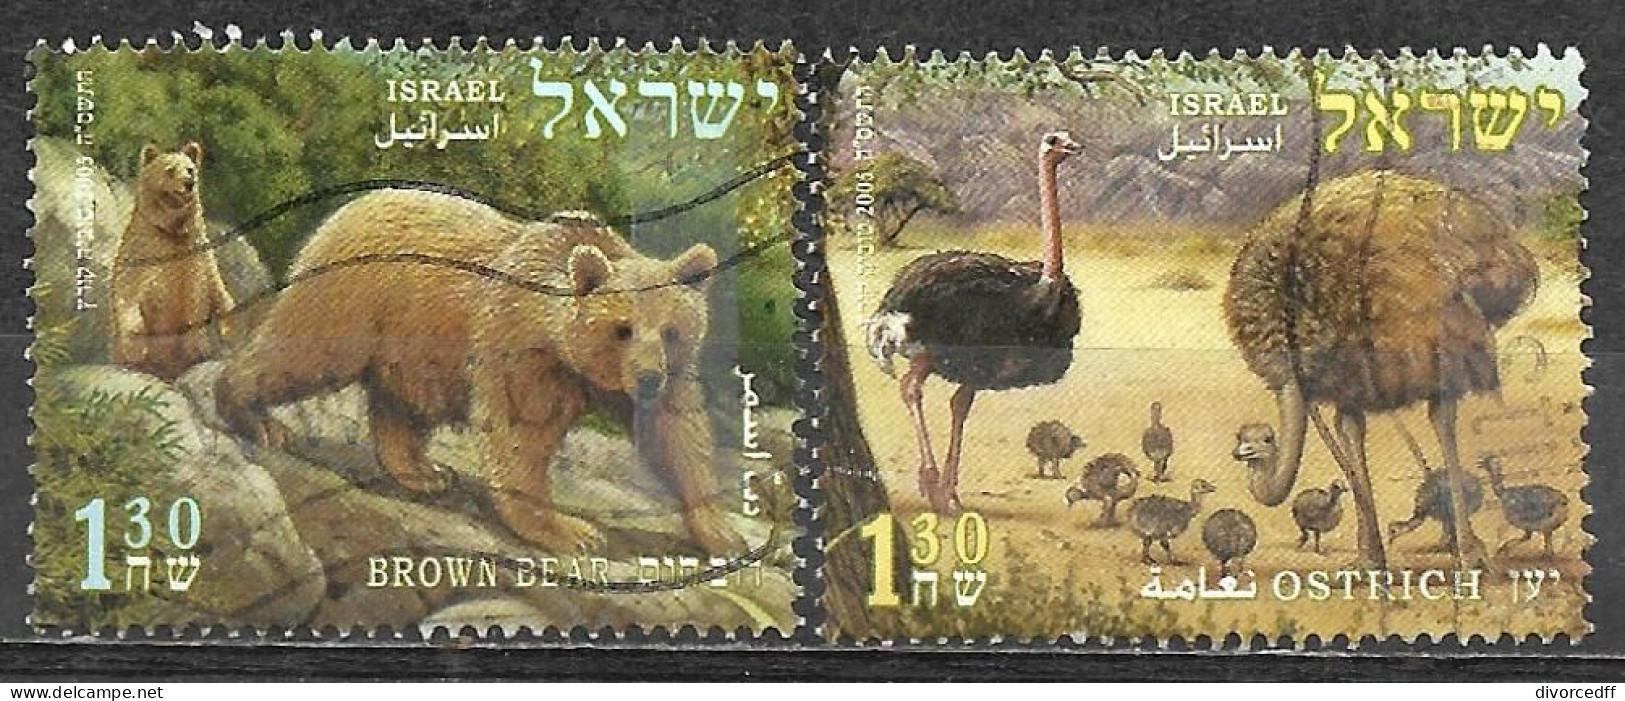 Israel 2005 Used Stamps Animals From The Bible Bear Ostrich [INLT19] - Used Stamps (without Tabs)